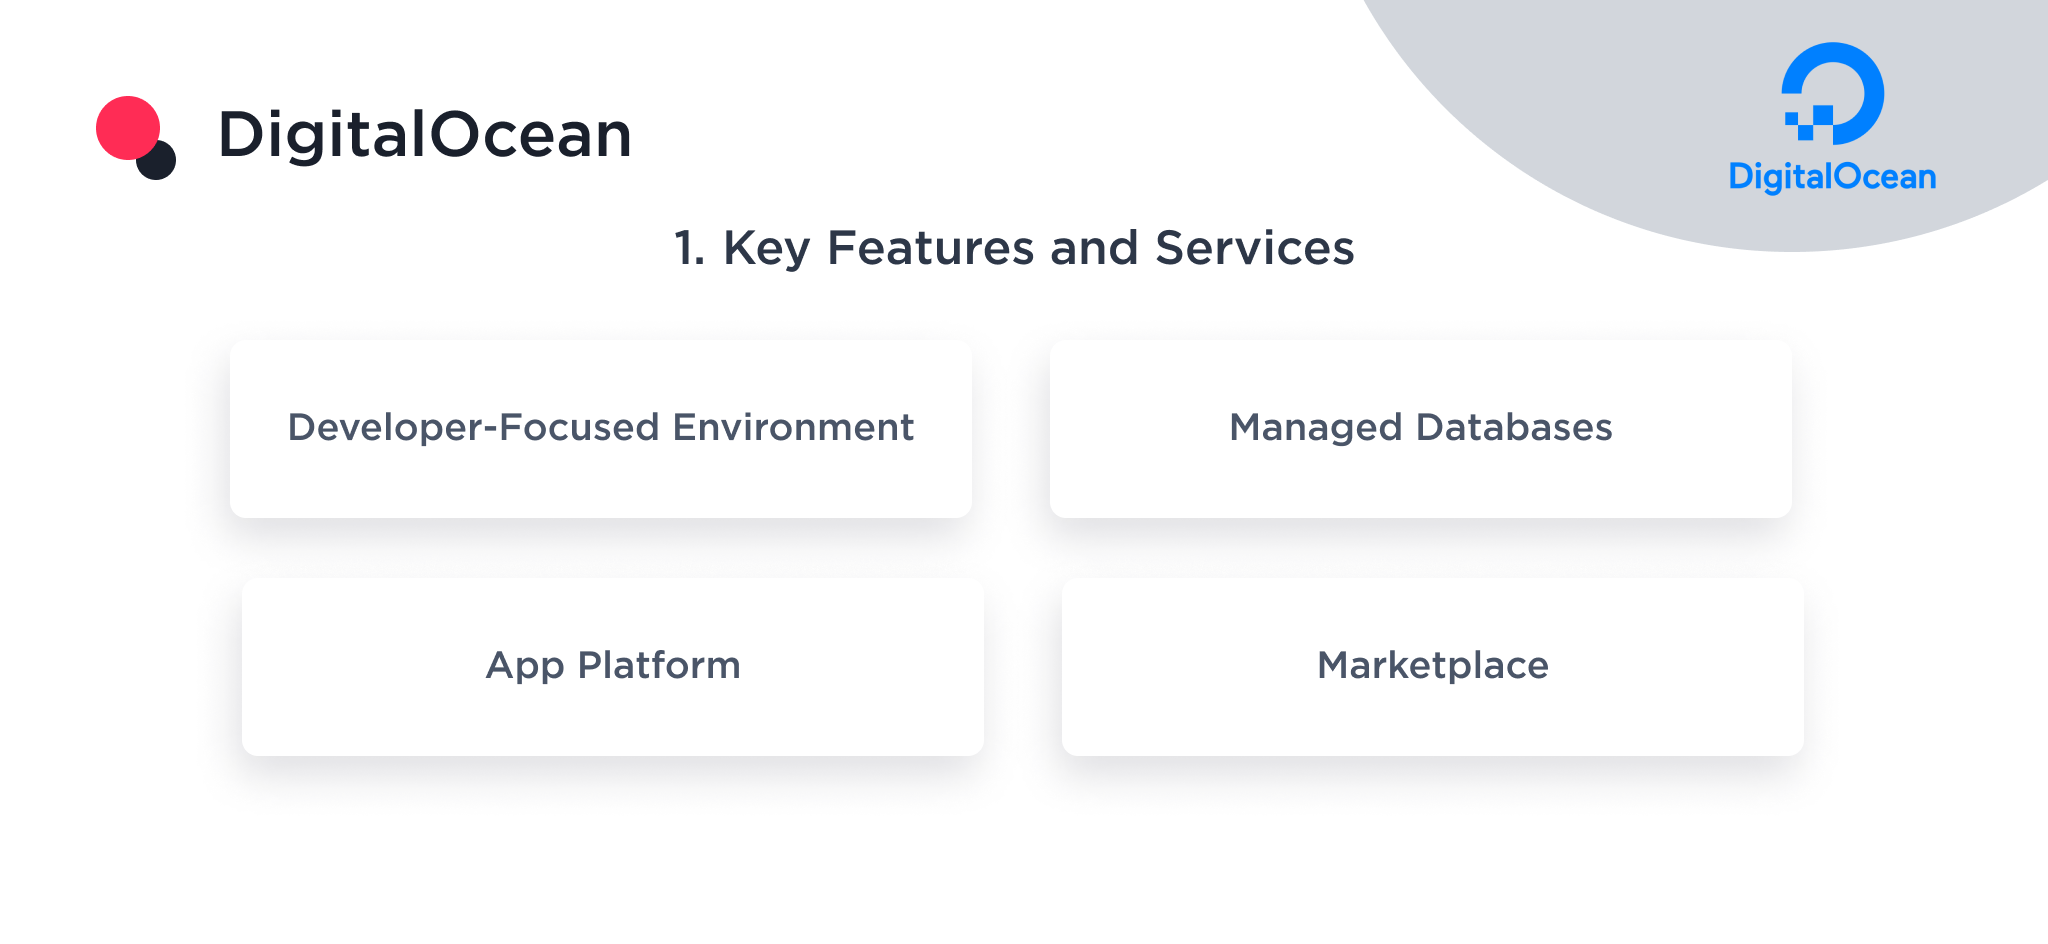 This image shows the main features and services provided by DigitalOcean